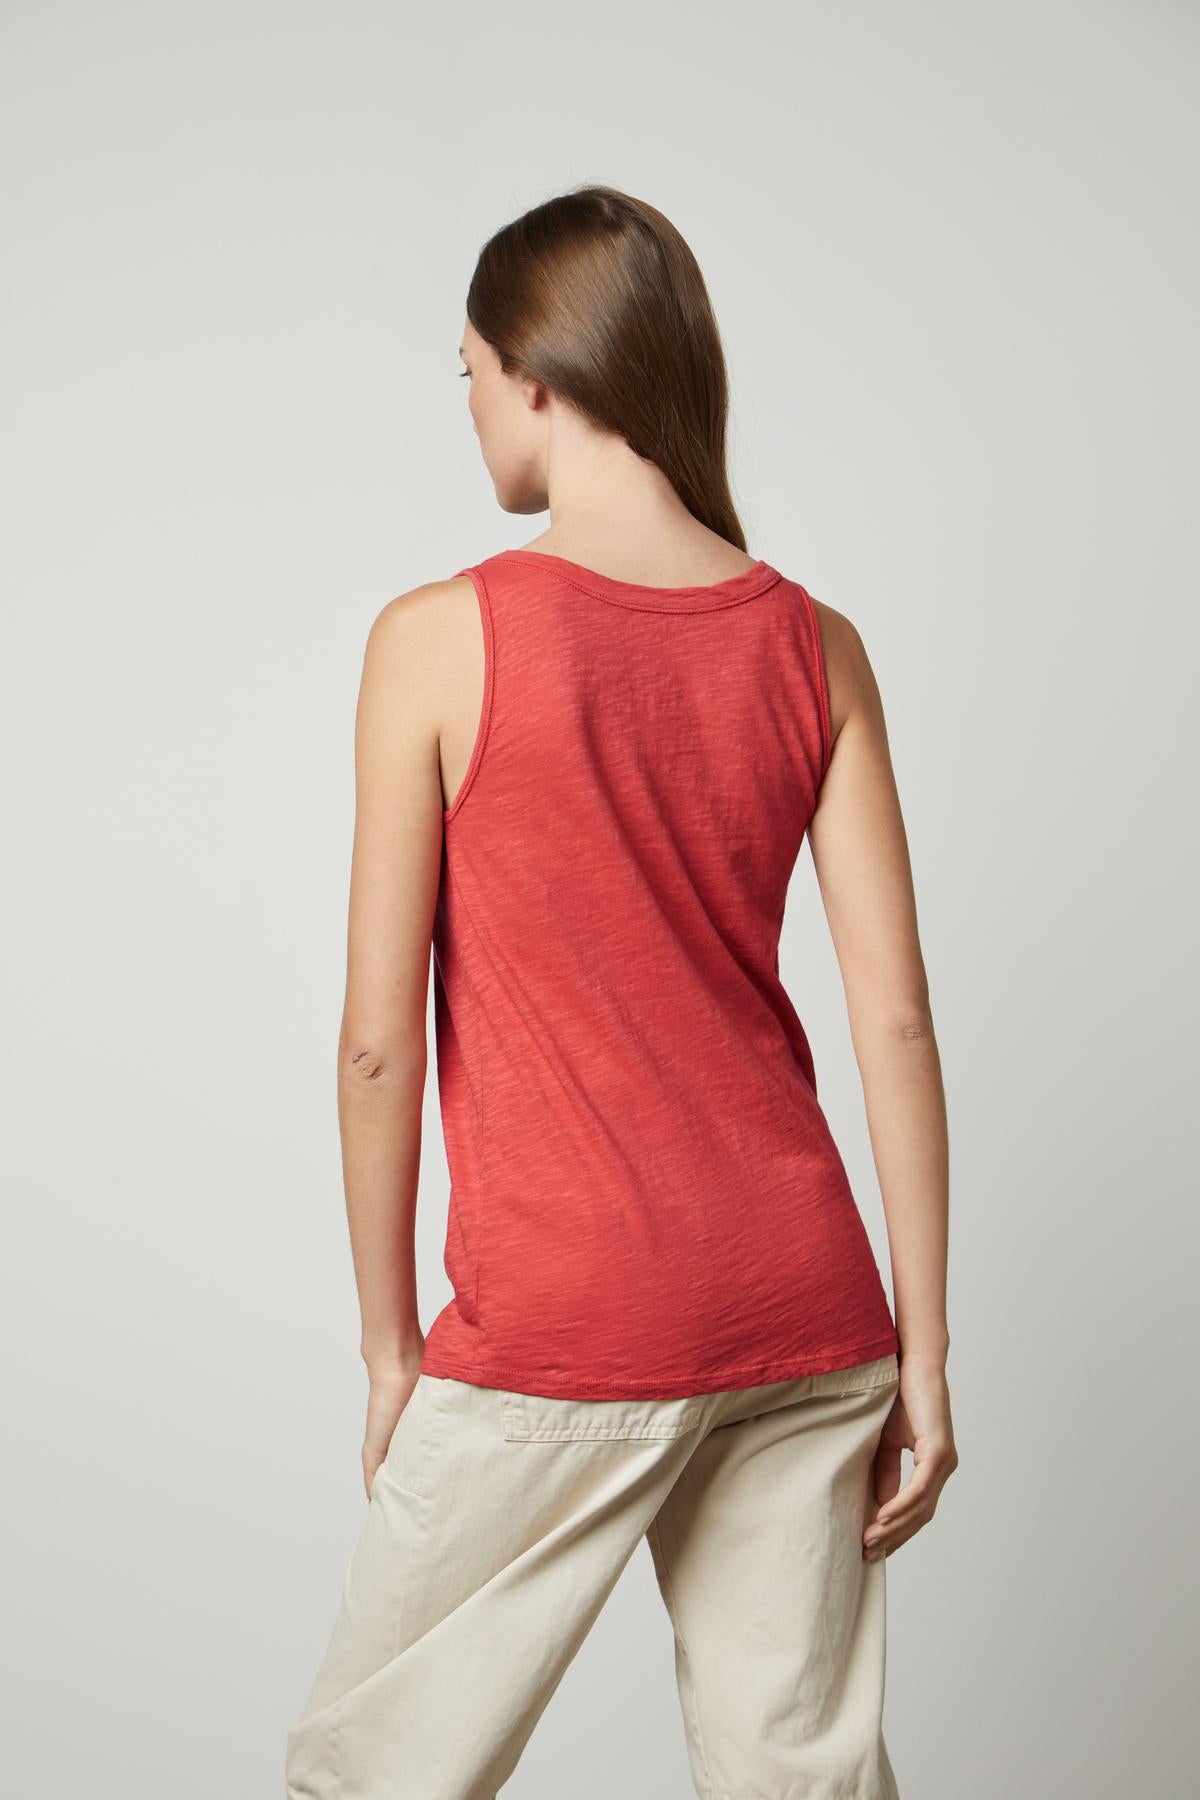 The back view of a woman wearing a red Velvet by Graham & Spencer tank top and tan pants, with flattering arm hole.-35201175748801